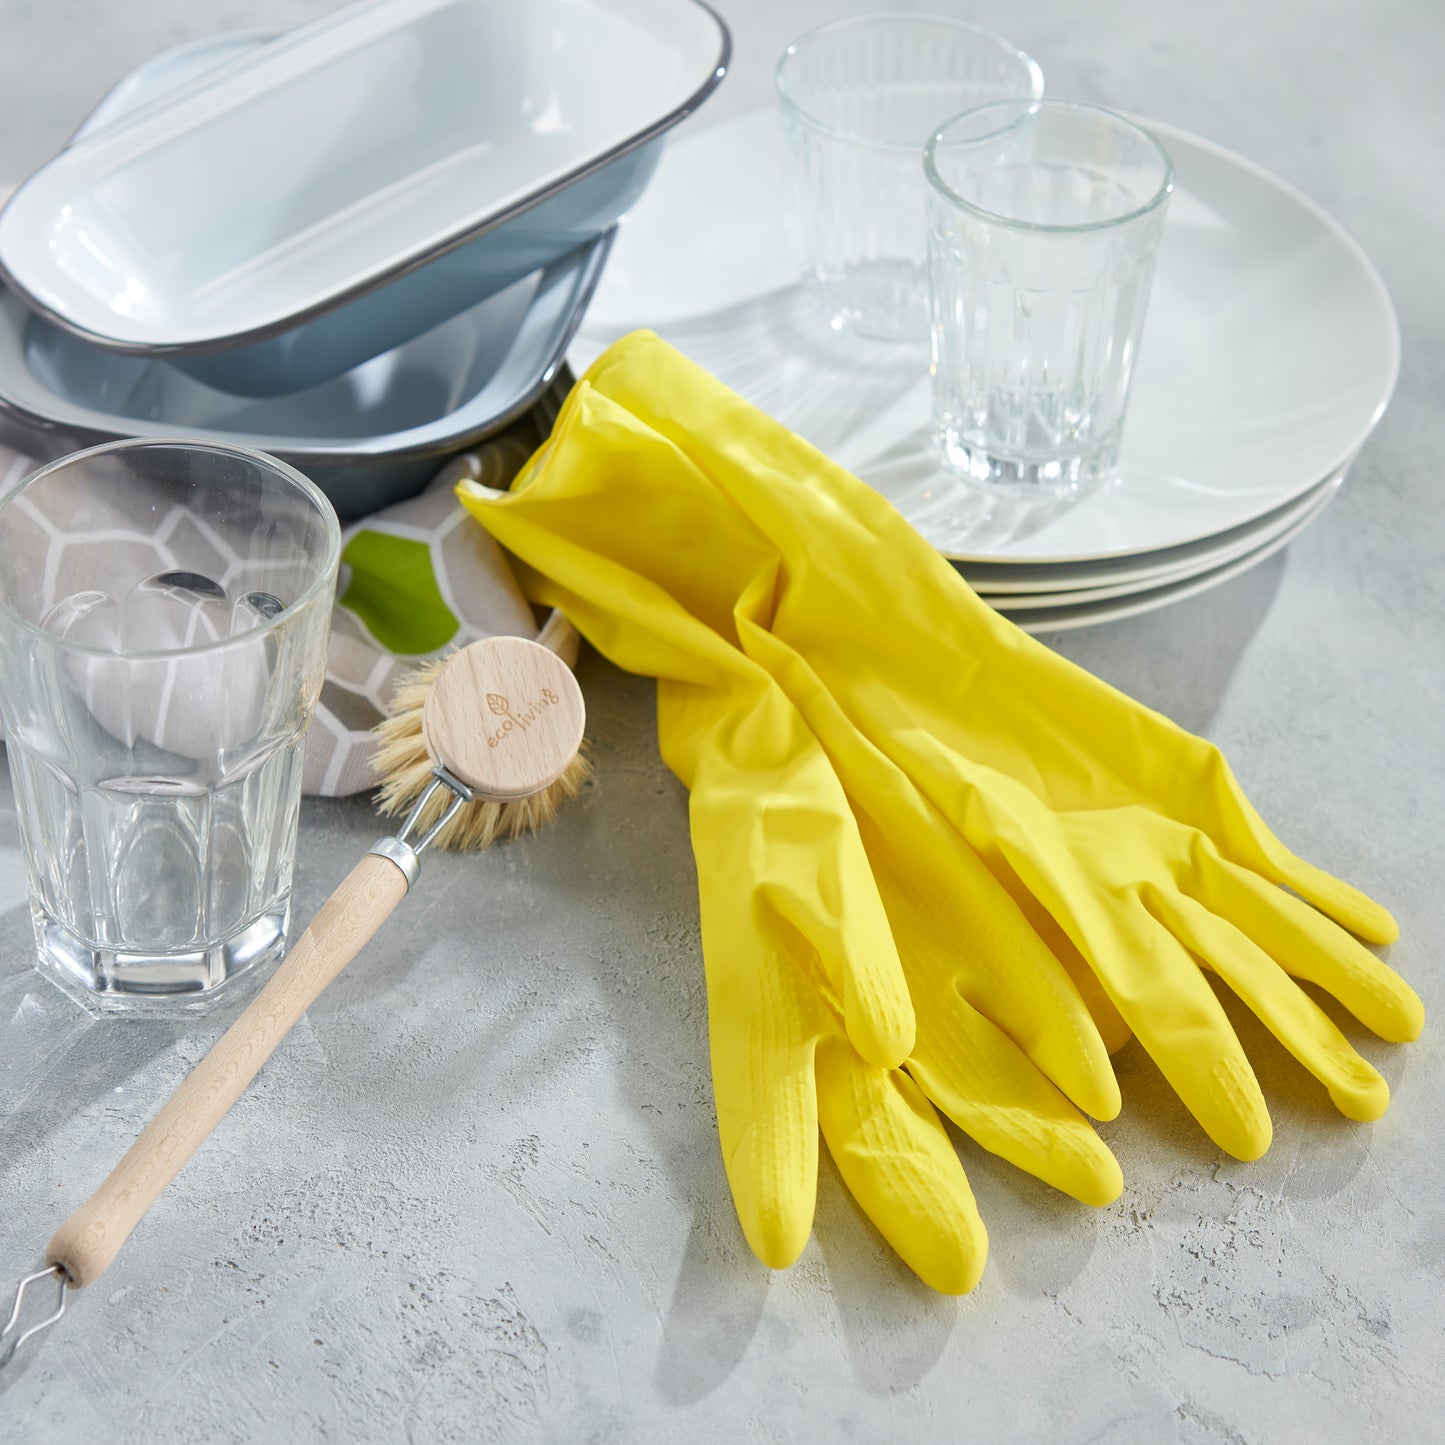 Rubber Gloves - Natural Latex